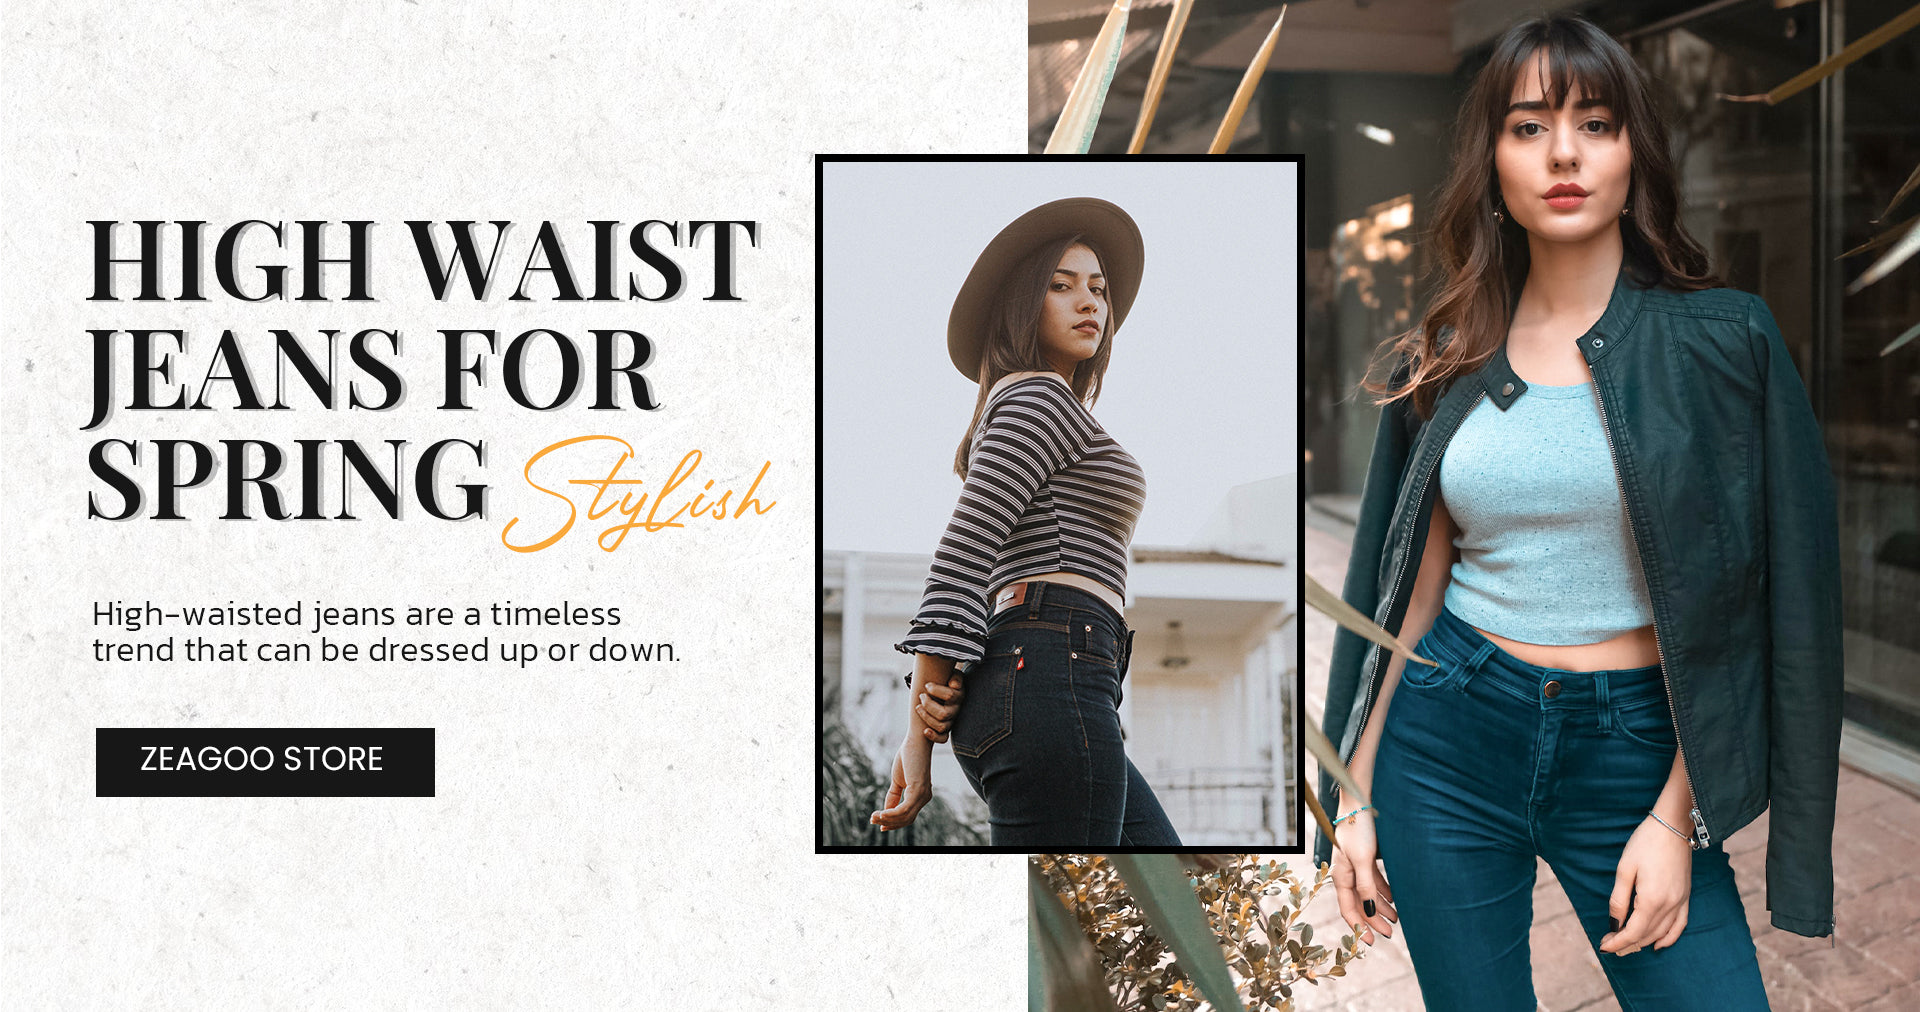 The Best High Waist Jeans For Spring: 5 Different Styles To Try